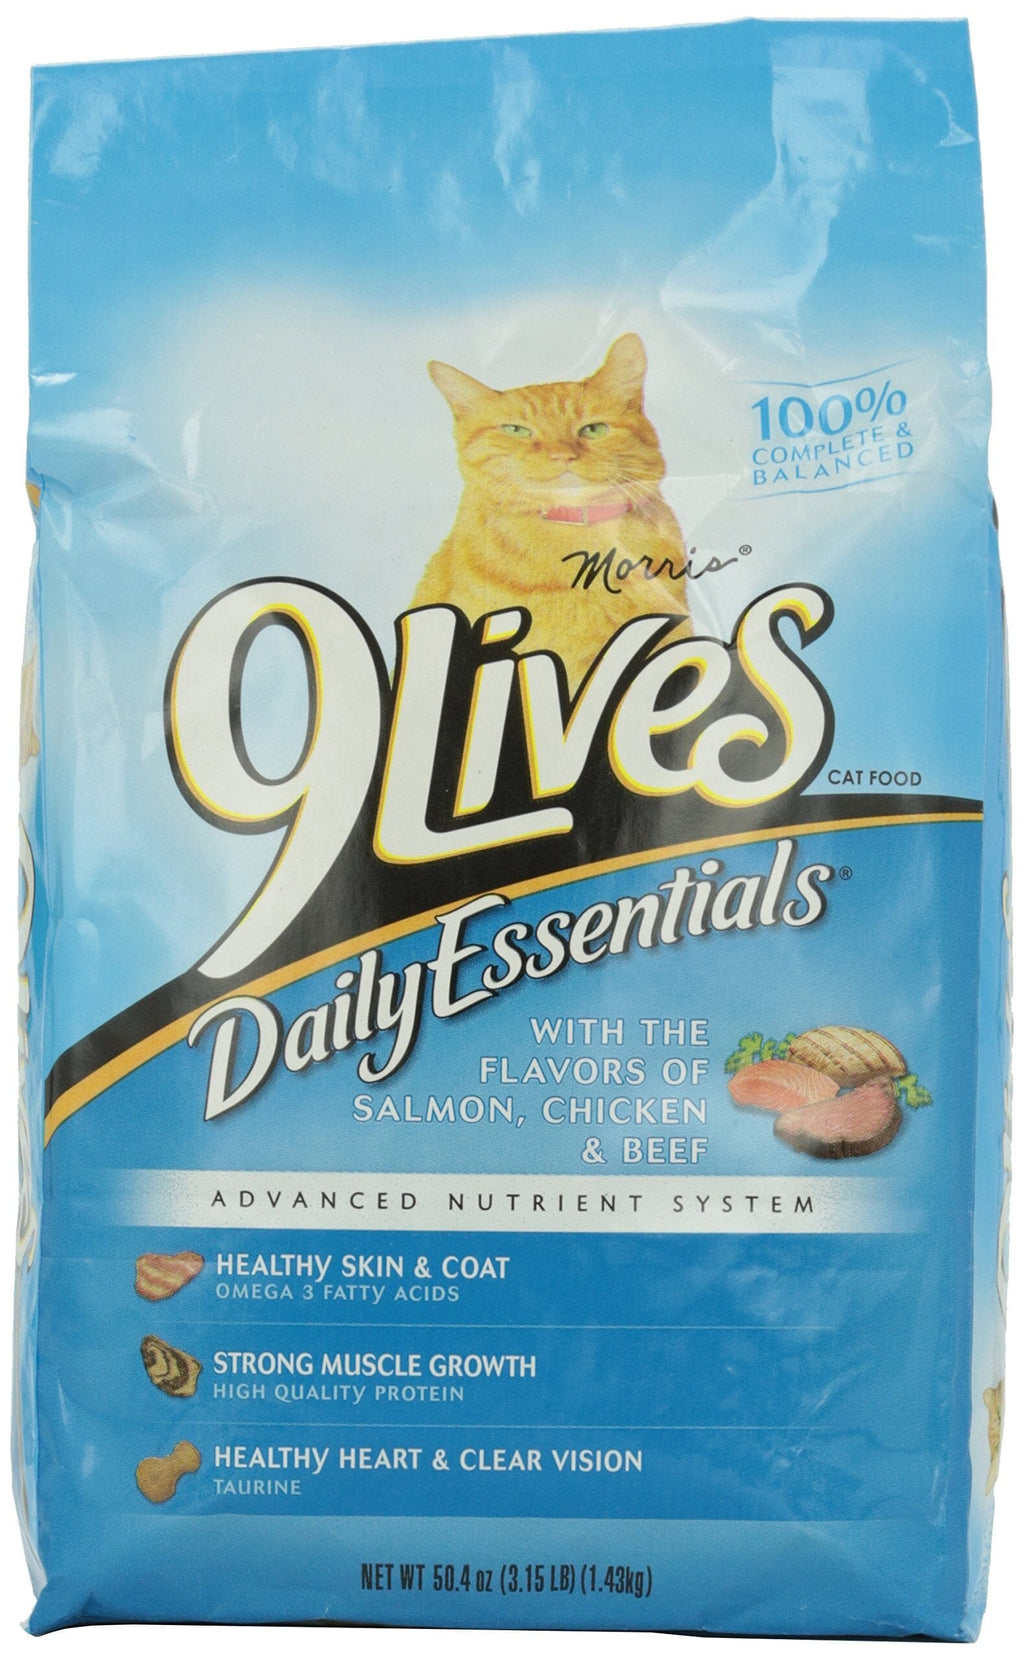 9Lives Daily Essentials Chicken Beef and Salmon Dry Cat Food - 3.15 Lbs - Case of 4  